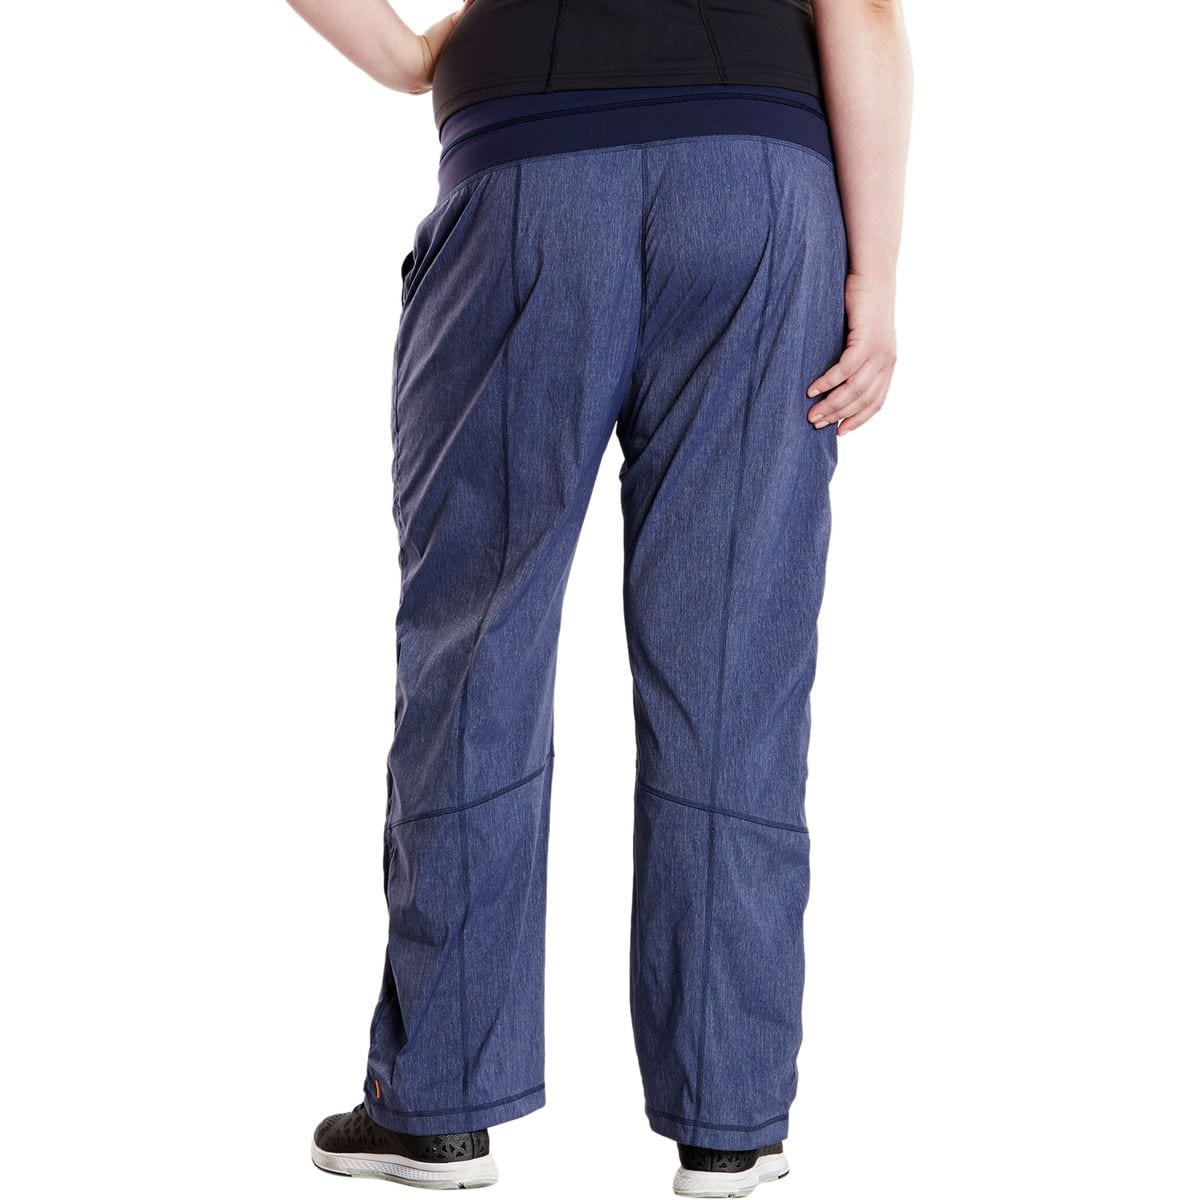 Lucy Get Going Pant  Lucy activewear, Active wear pants, Pants for women